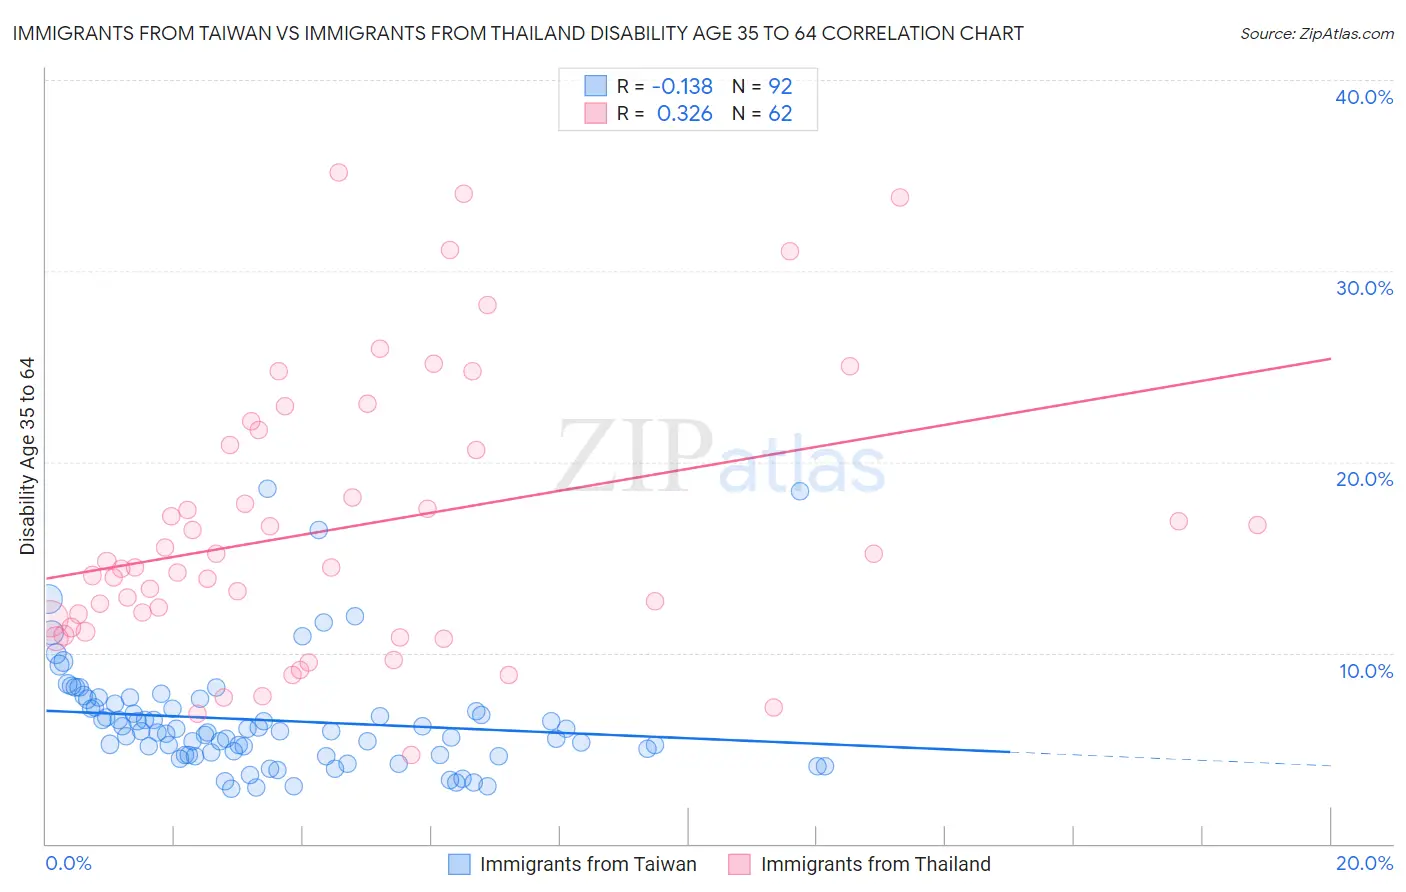 Immigrants from Taiwan vs Immigrants from Thailand Disability Age 35 to 64